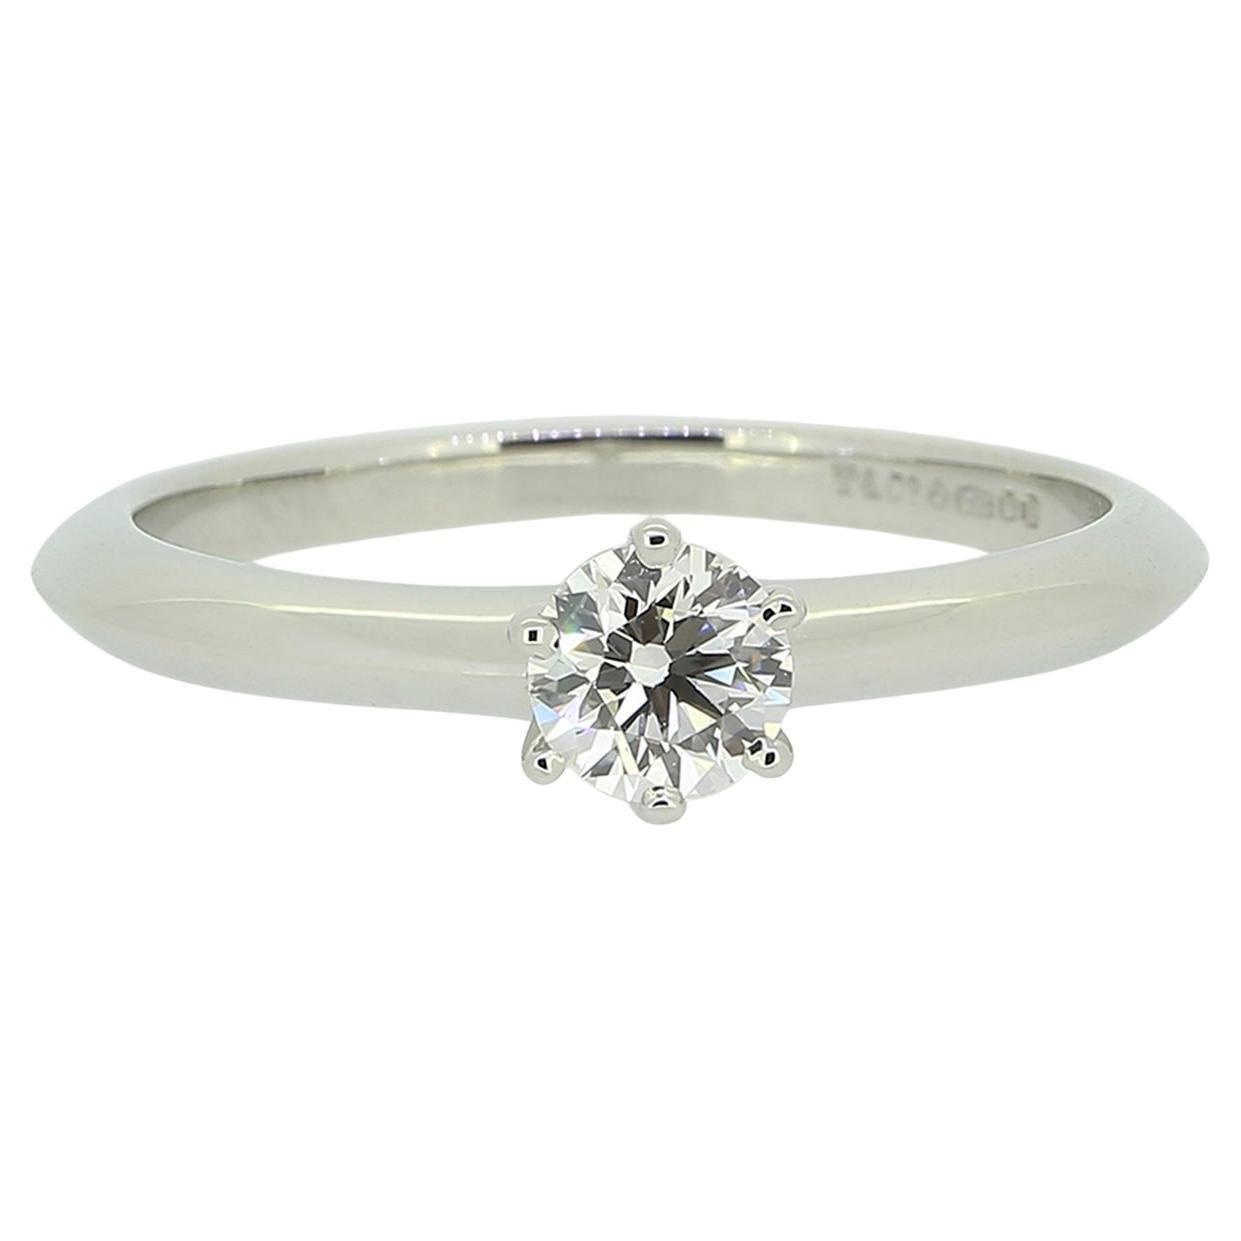 Tiffany & Co. 0.24 Carat Diamond Engagement Ring For Sale